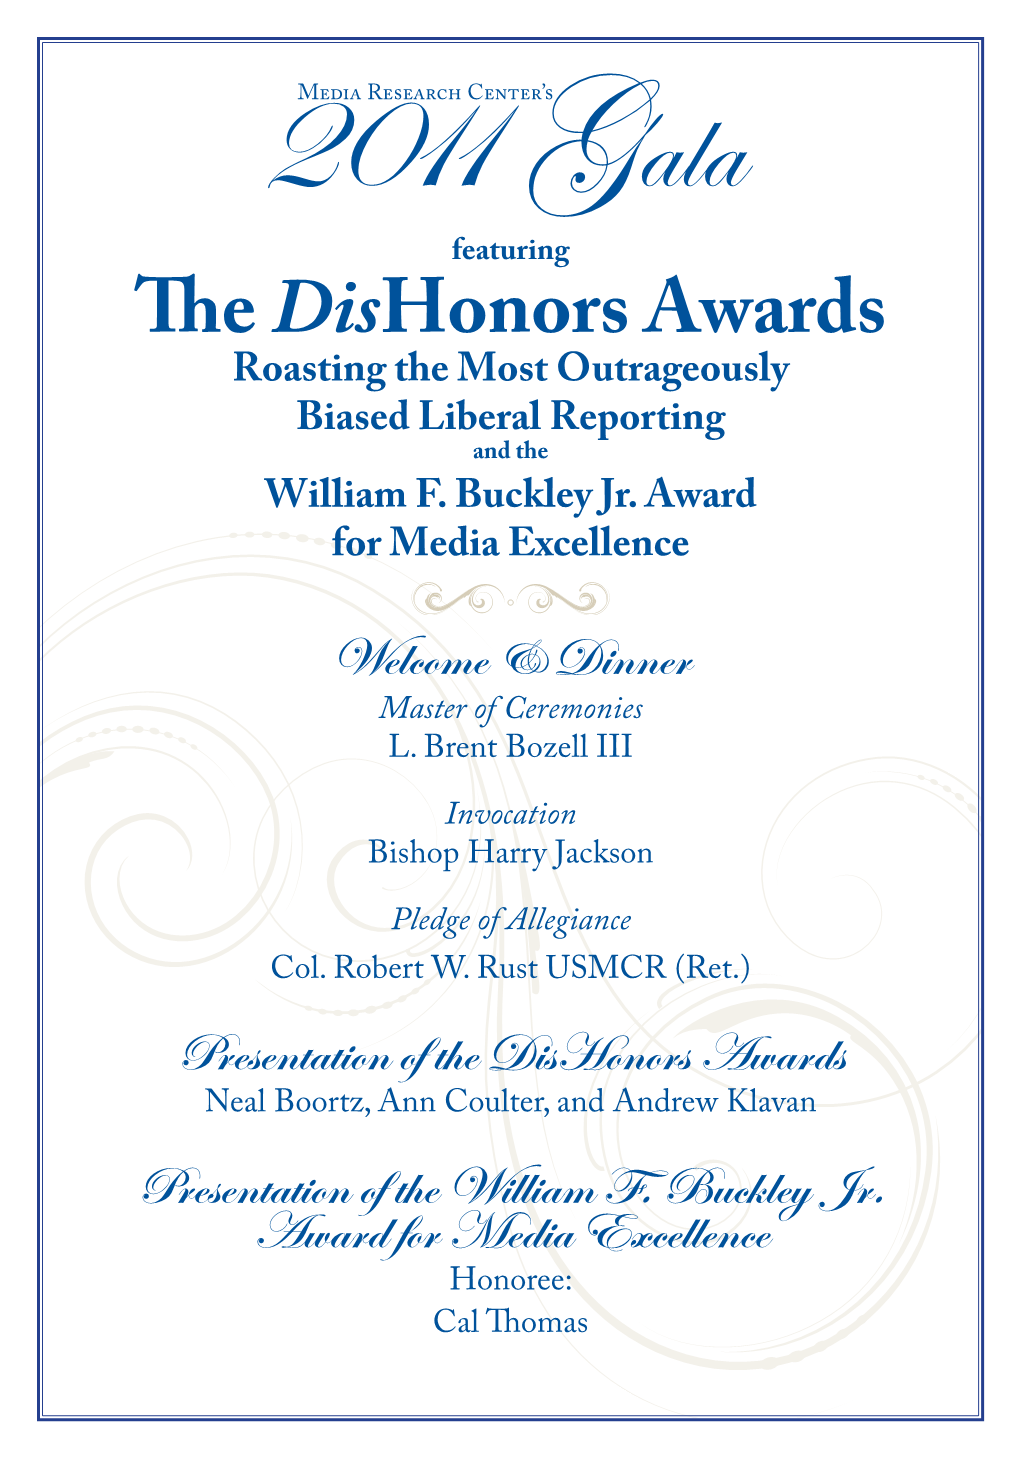 The Dishonors Awards Roasting the Most Outrageously Biased Liberal Reporting and the William F